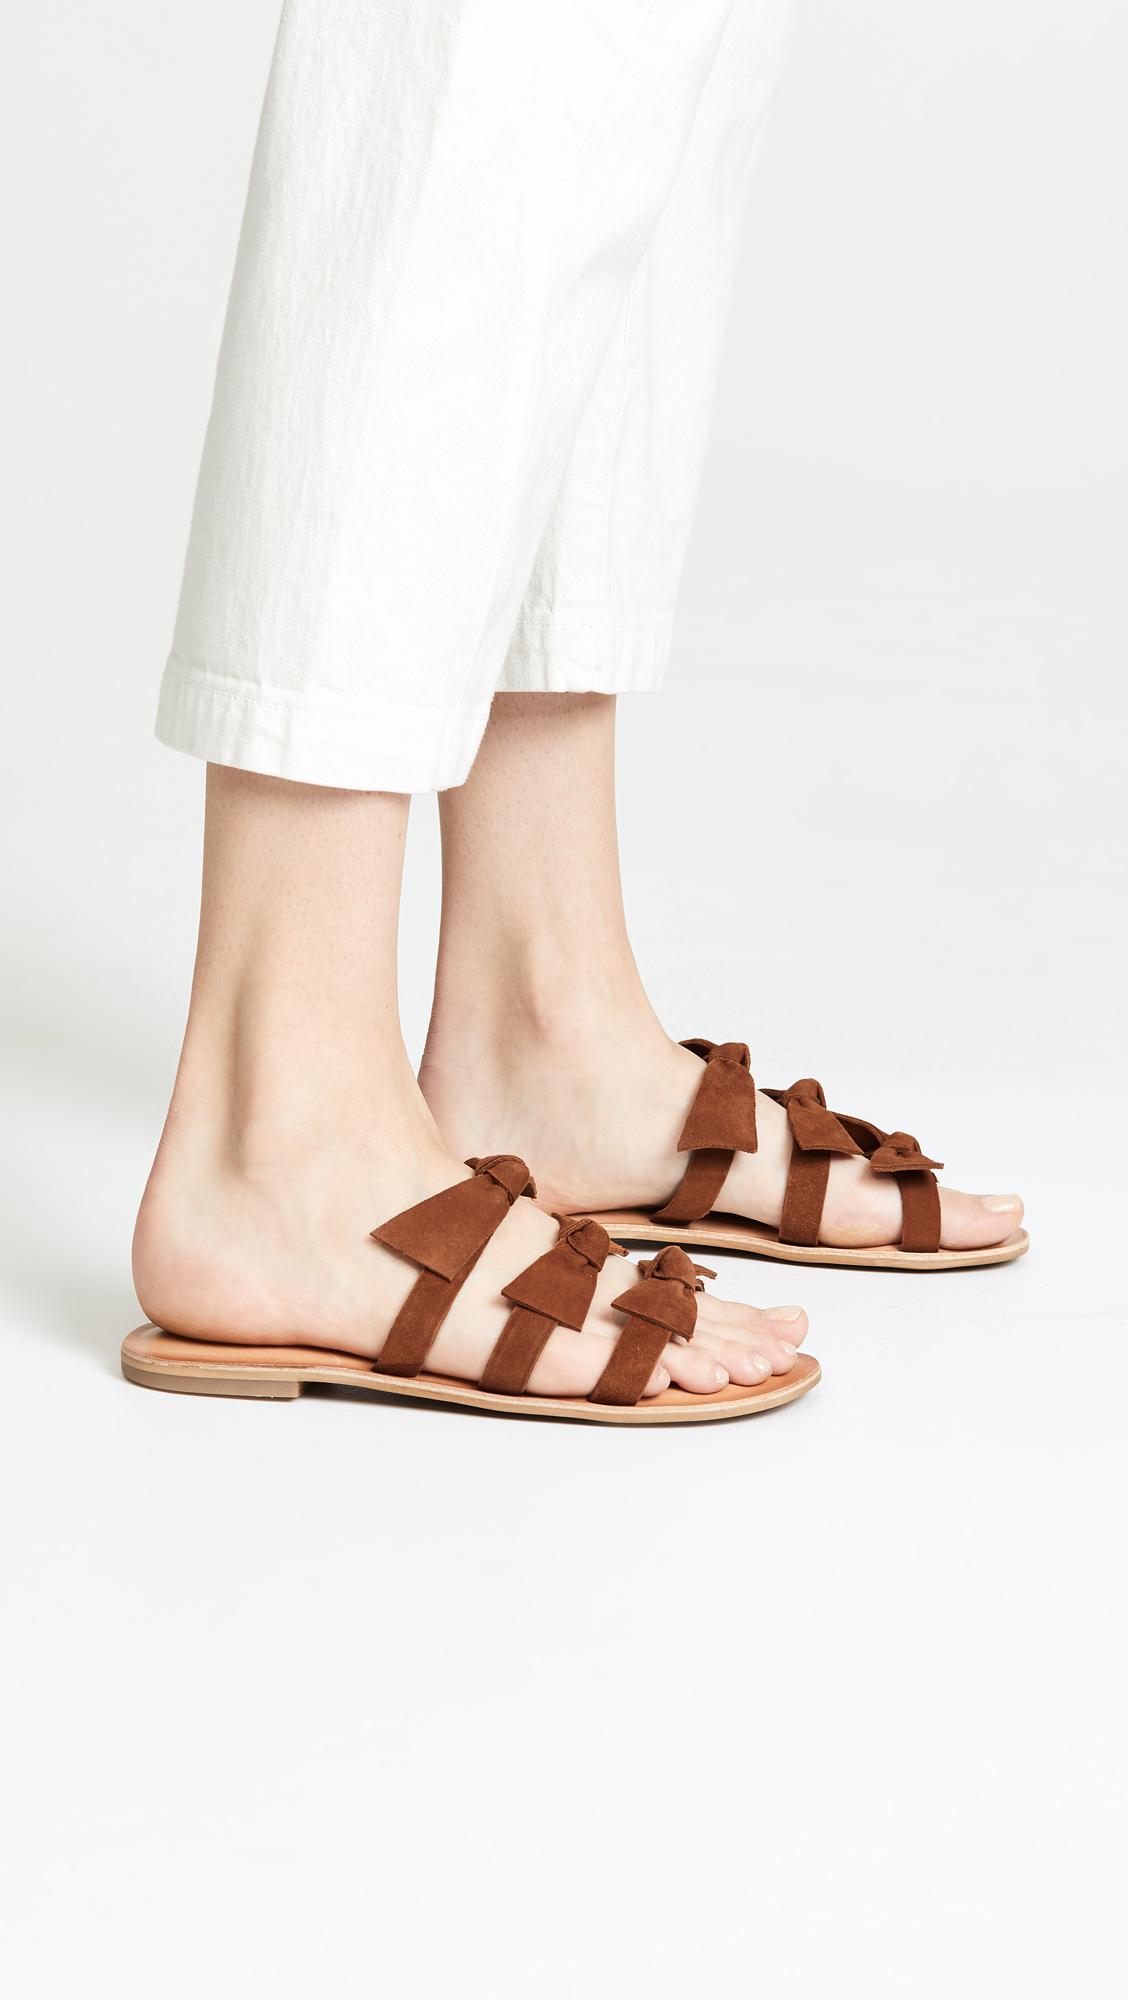 Jeffrey Campbell Atone Bow Sandals in 